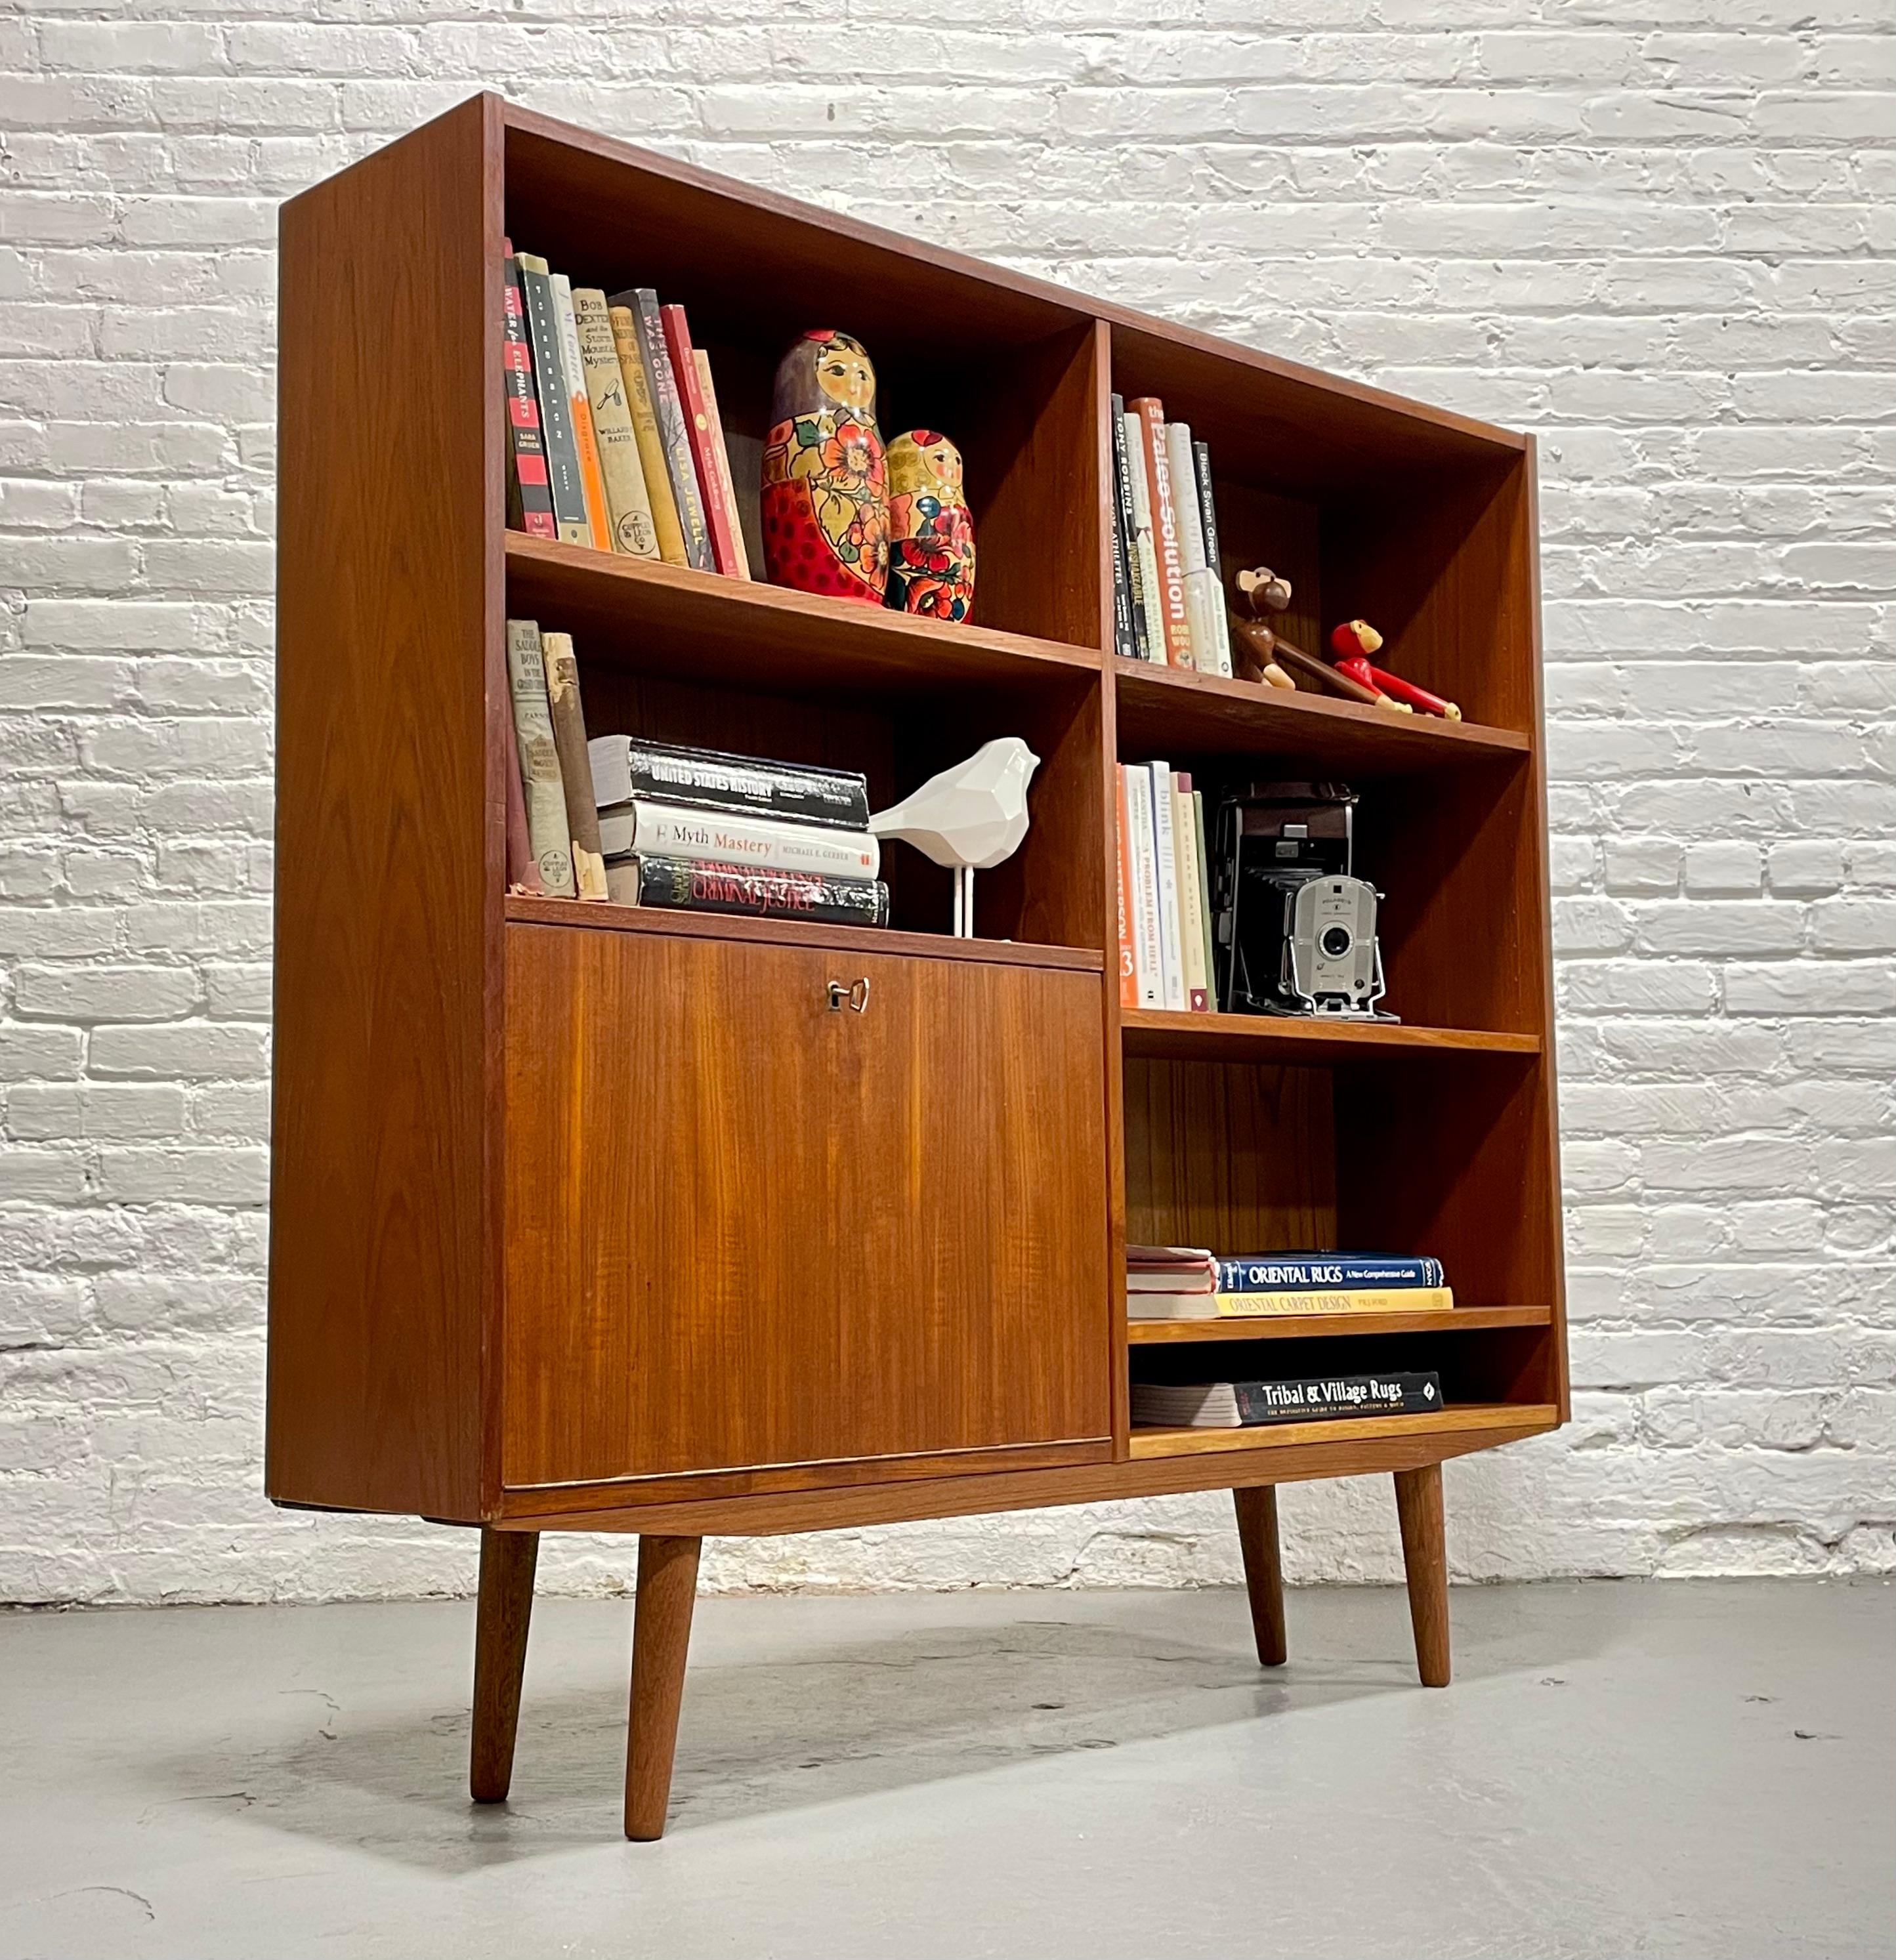 Mid Century Modern Teak Bookcase / Bar, Made in Denmark, c. 1960’s.  This beauty offer loads of storage for all your books and collectables or use it as an amazing liquor or china cabinet.  Tons of gorgeous design details such as a drop down